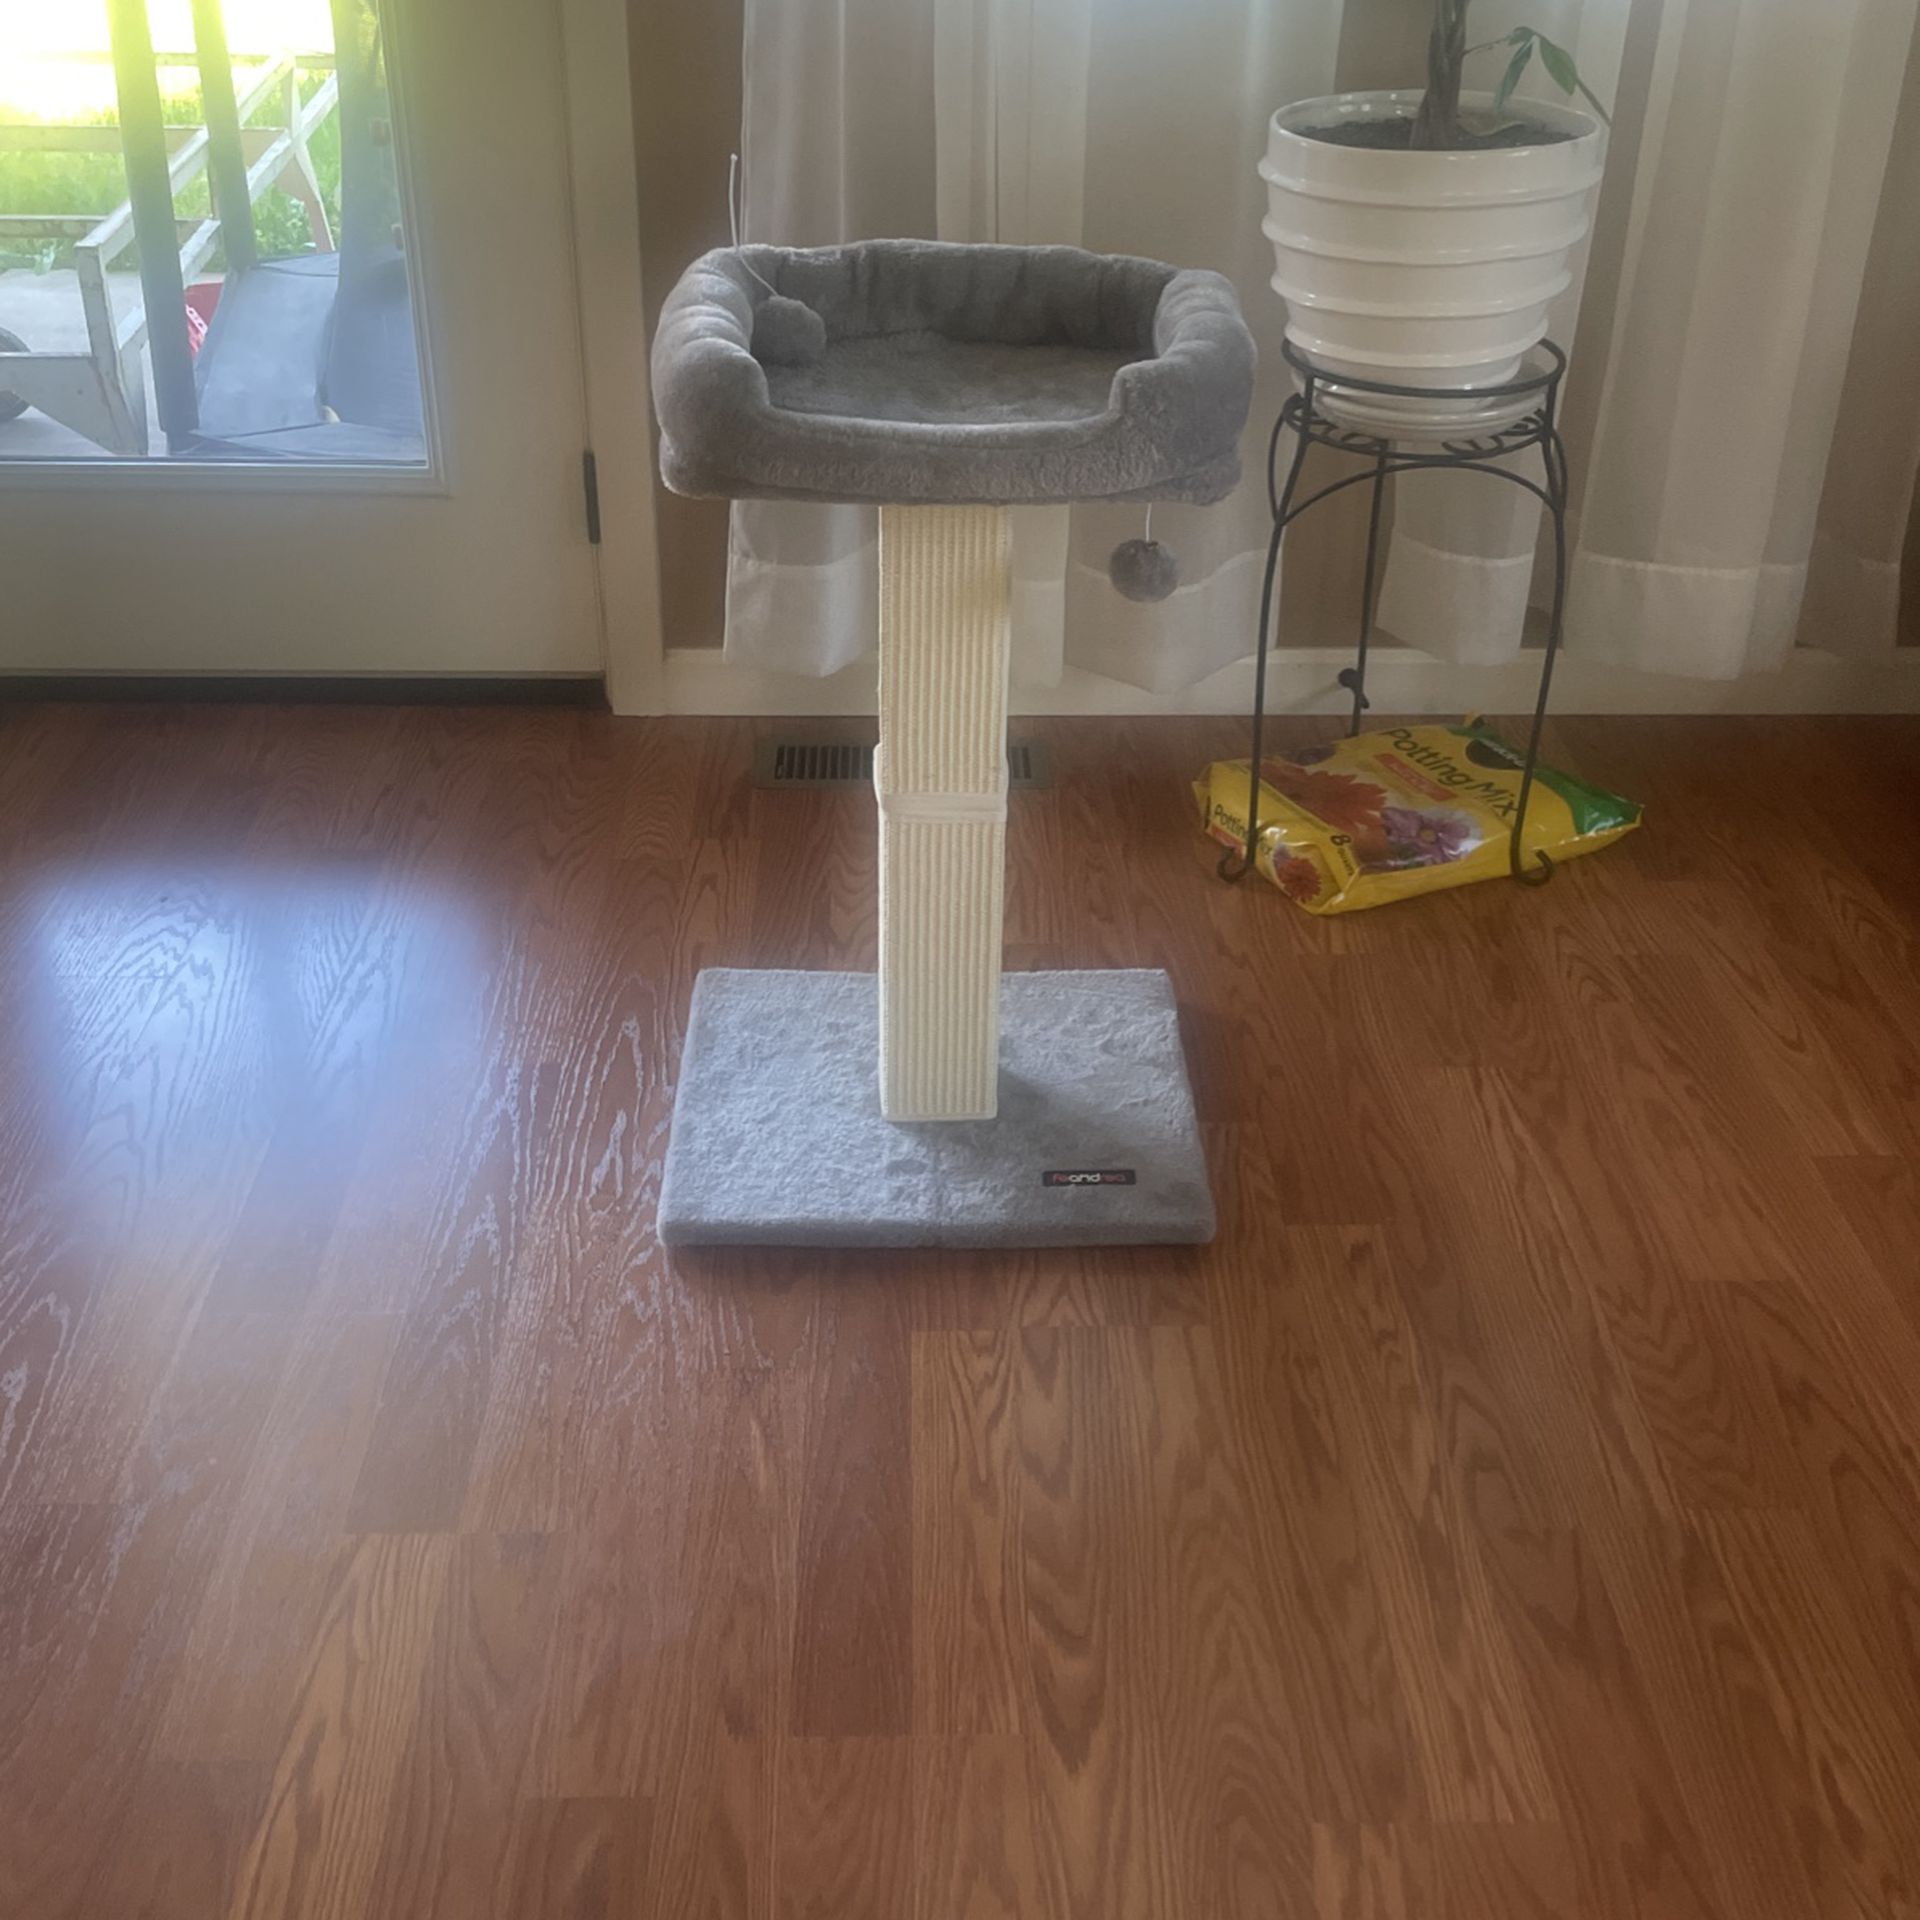 Brand New Built, Cat Tree Excellent Condition